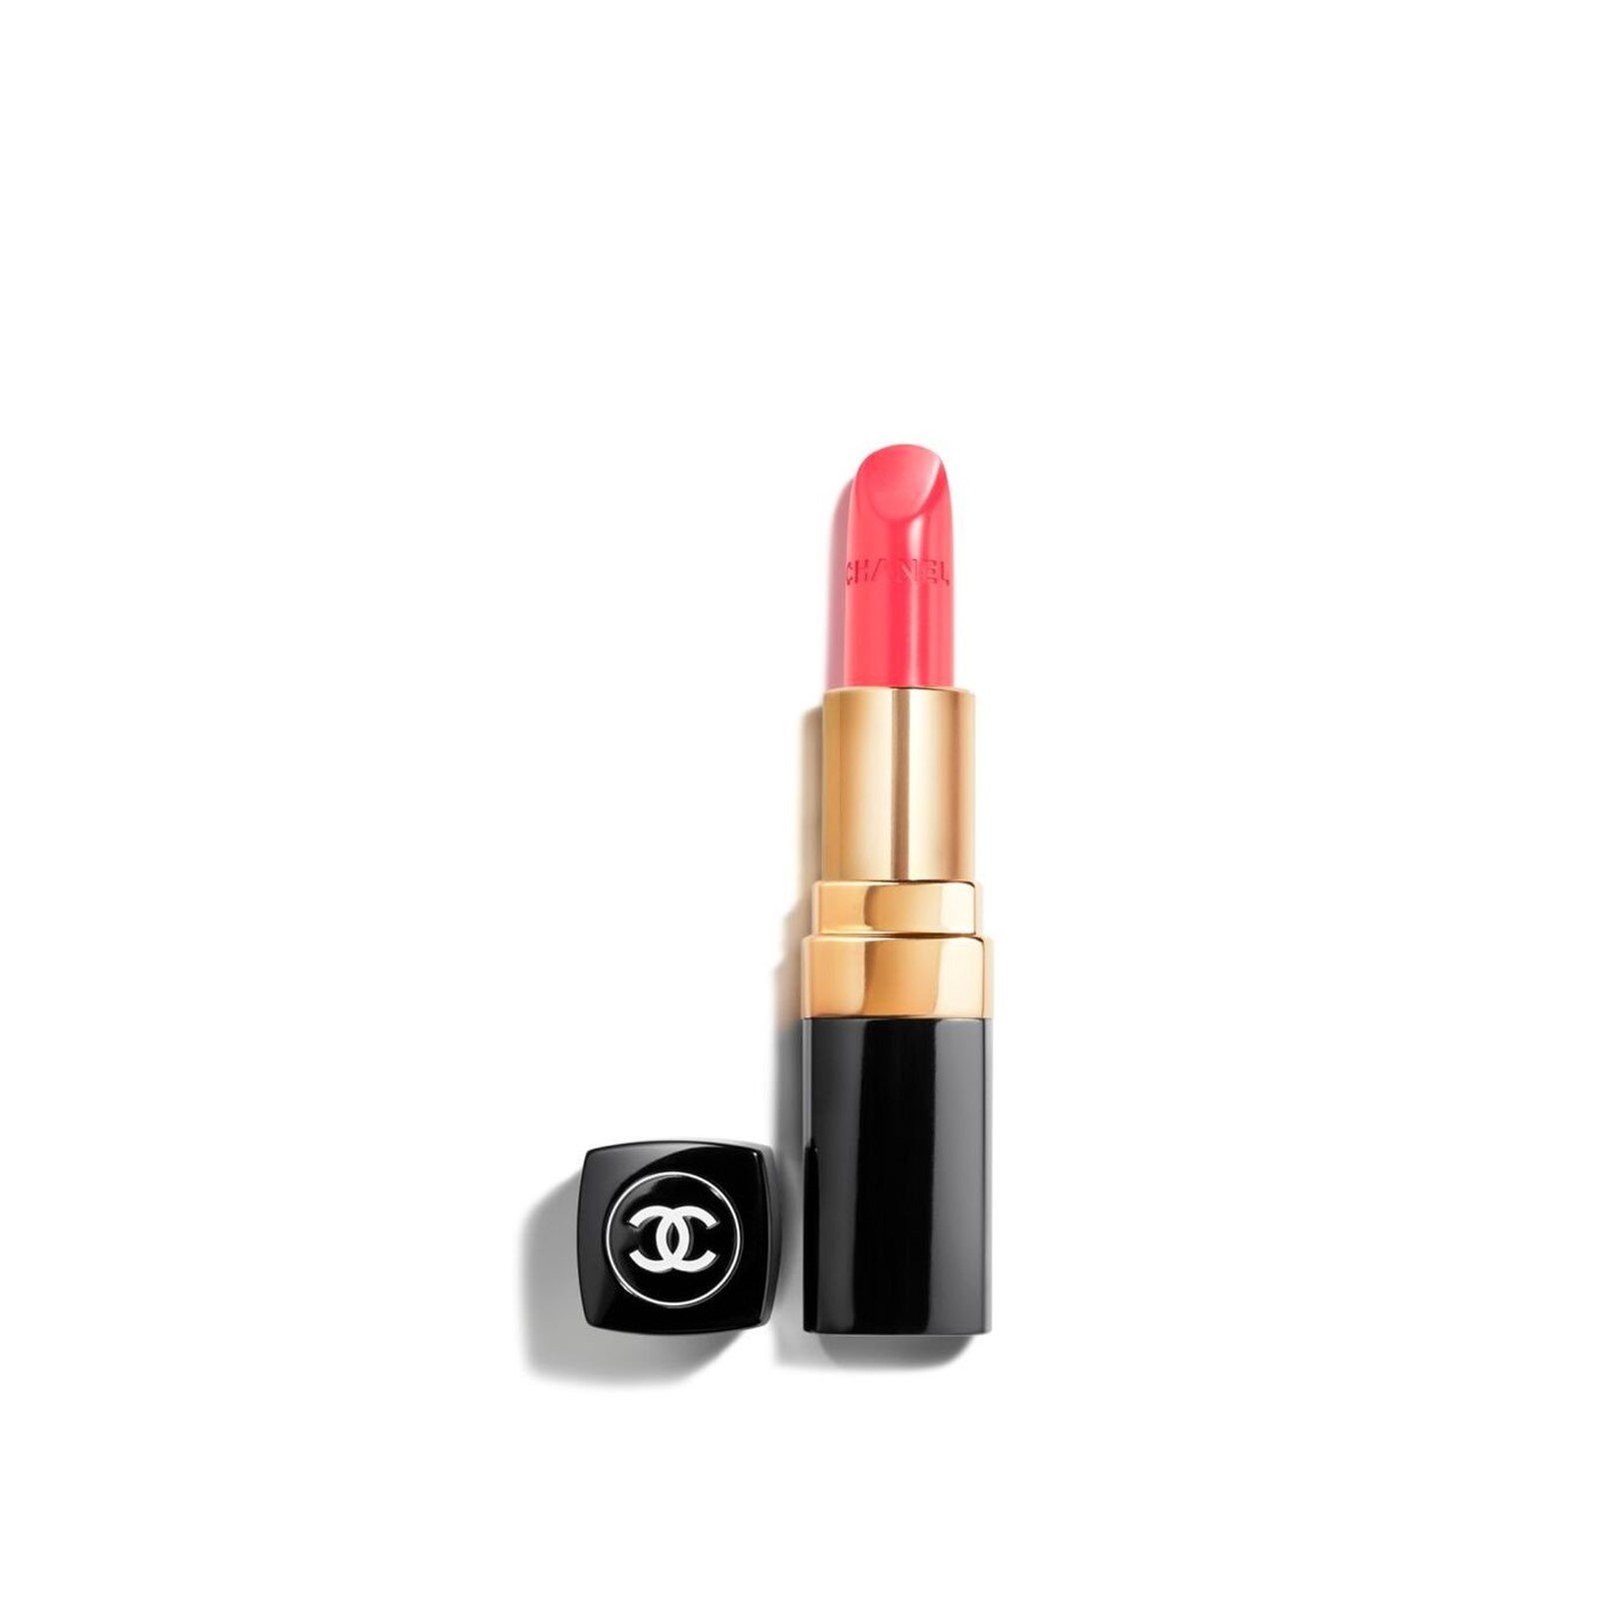 CHANEL Rouge Coco Ultra Hydrating Lip Colour 480 Corail Vibrant 3.5g